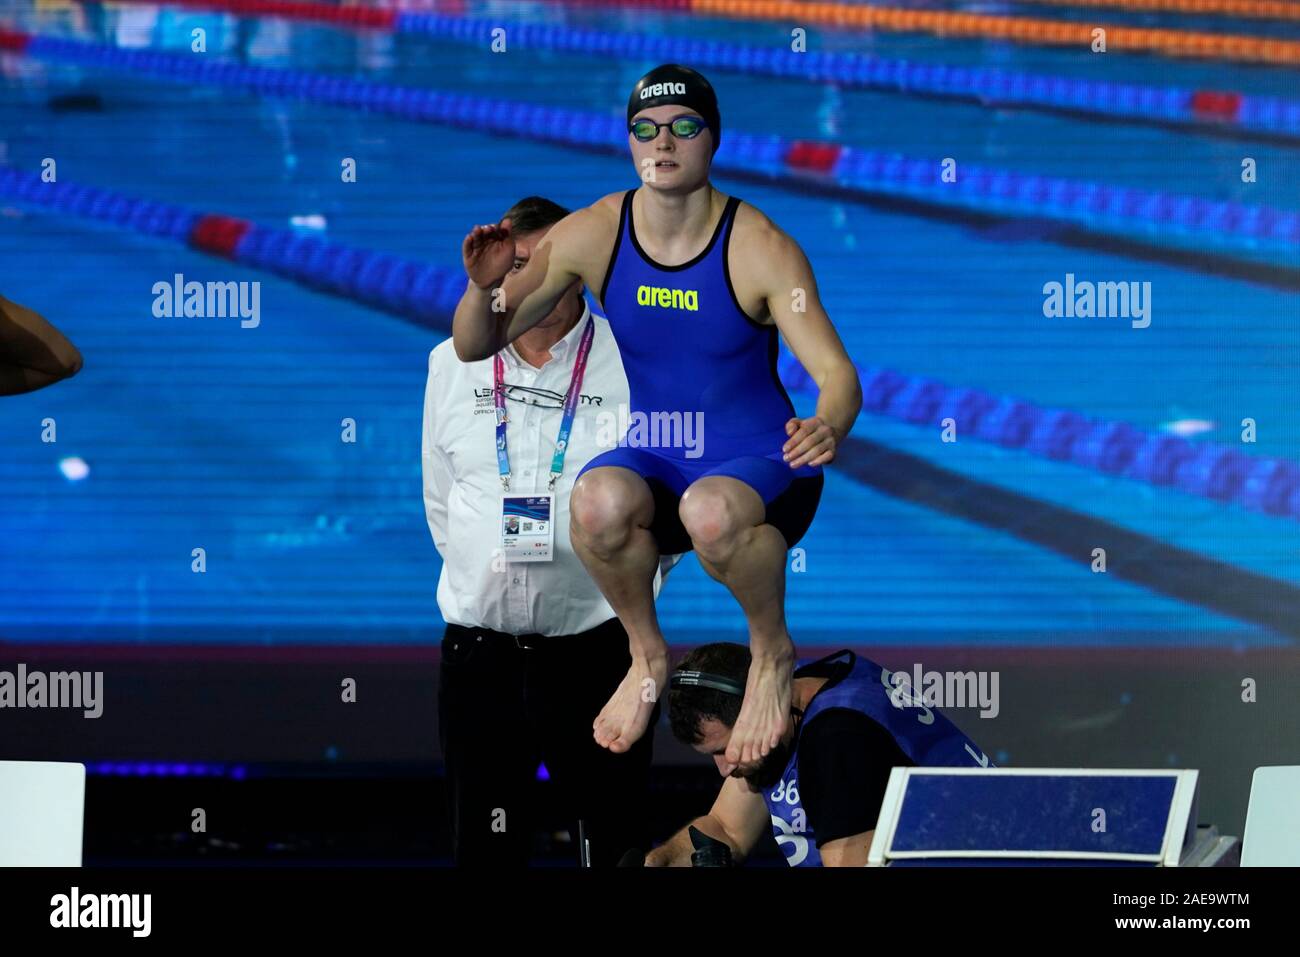 Mona Mc Sharry (IRE) uring LEN European Short Course Swimming Championships  2019 on December 7. 2019 in Tollcross Stadium in Glasgow (UK) Photo:  SCS/Soenar Chamid/AFLO (HOLLAND OUT Stock Photo - Alamy